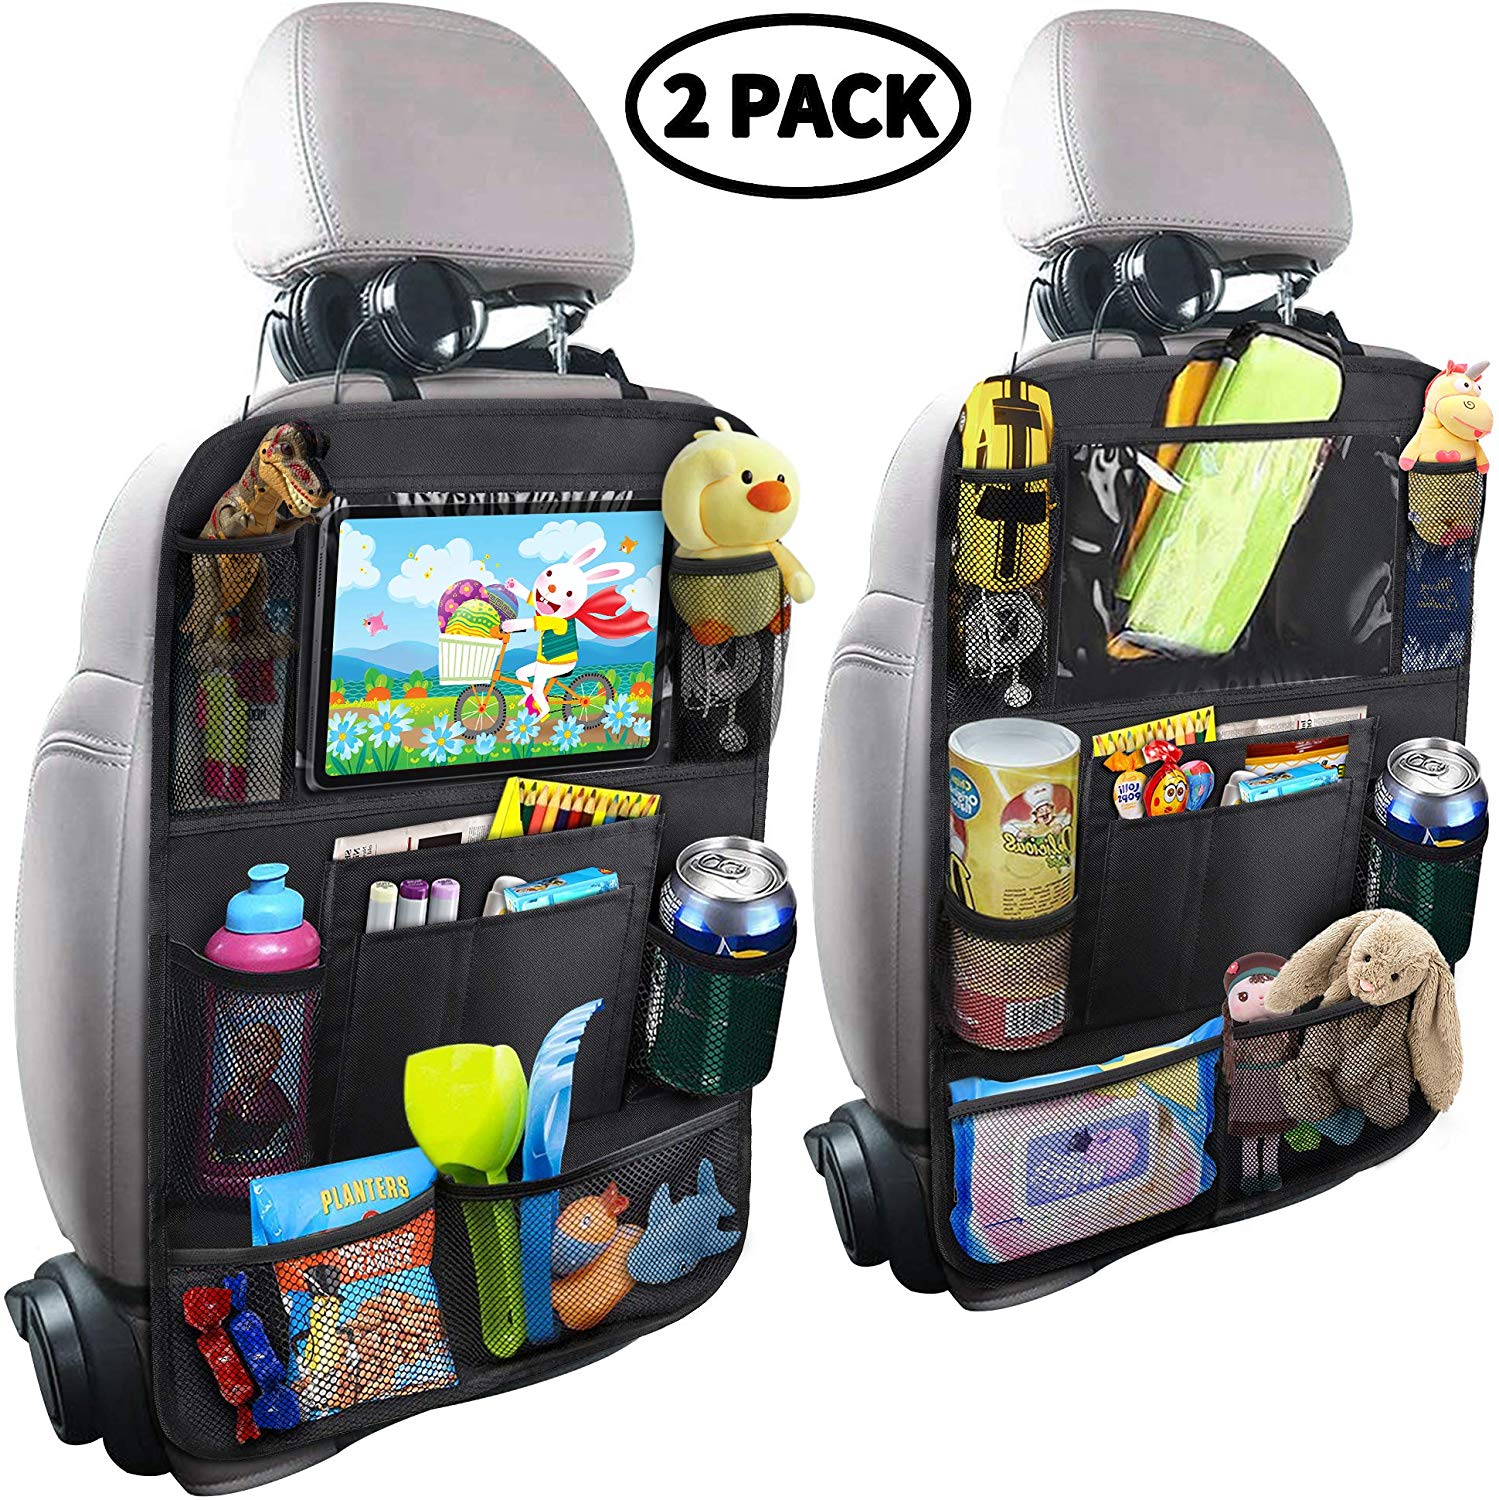 MZTDYTL Car Backseat Organizer with Touch Screen Tablet Holder + 9 Storage Pockets Kick Mats Car Seat Back Protectors Great Travel Accessories for Kids and Toddlers(2 Pack)